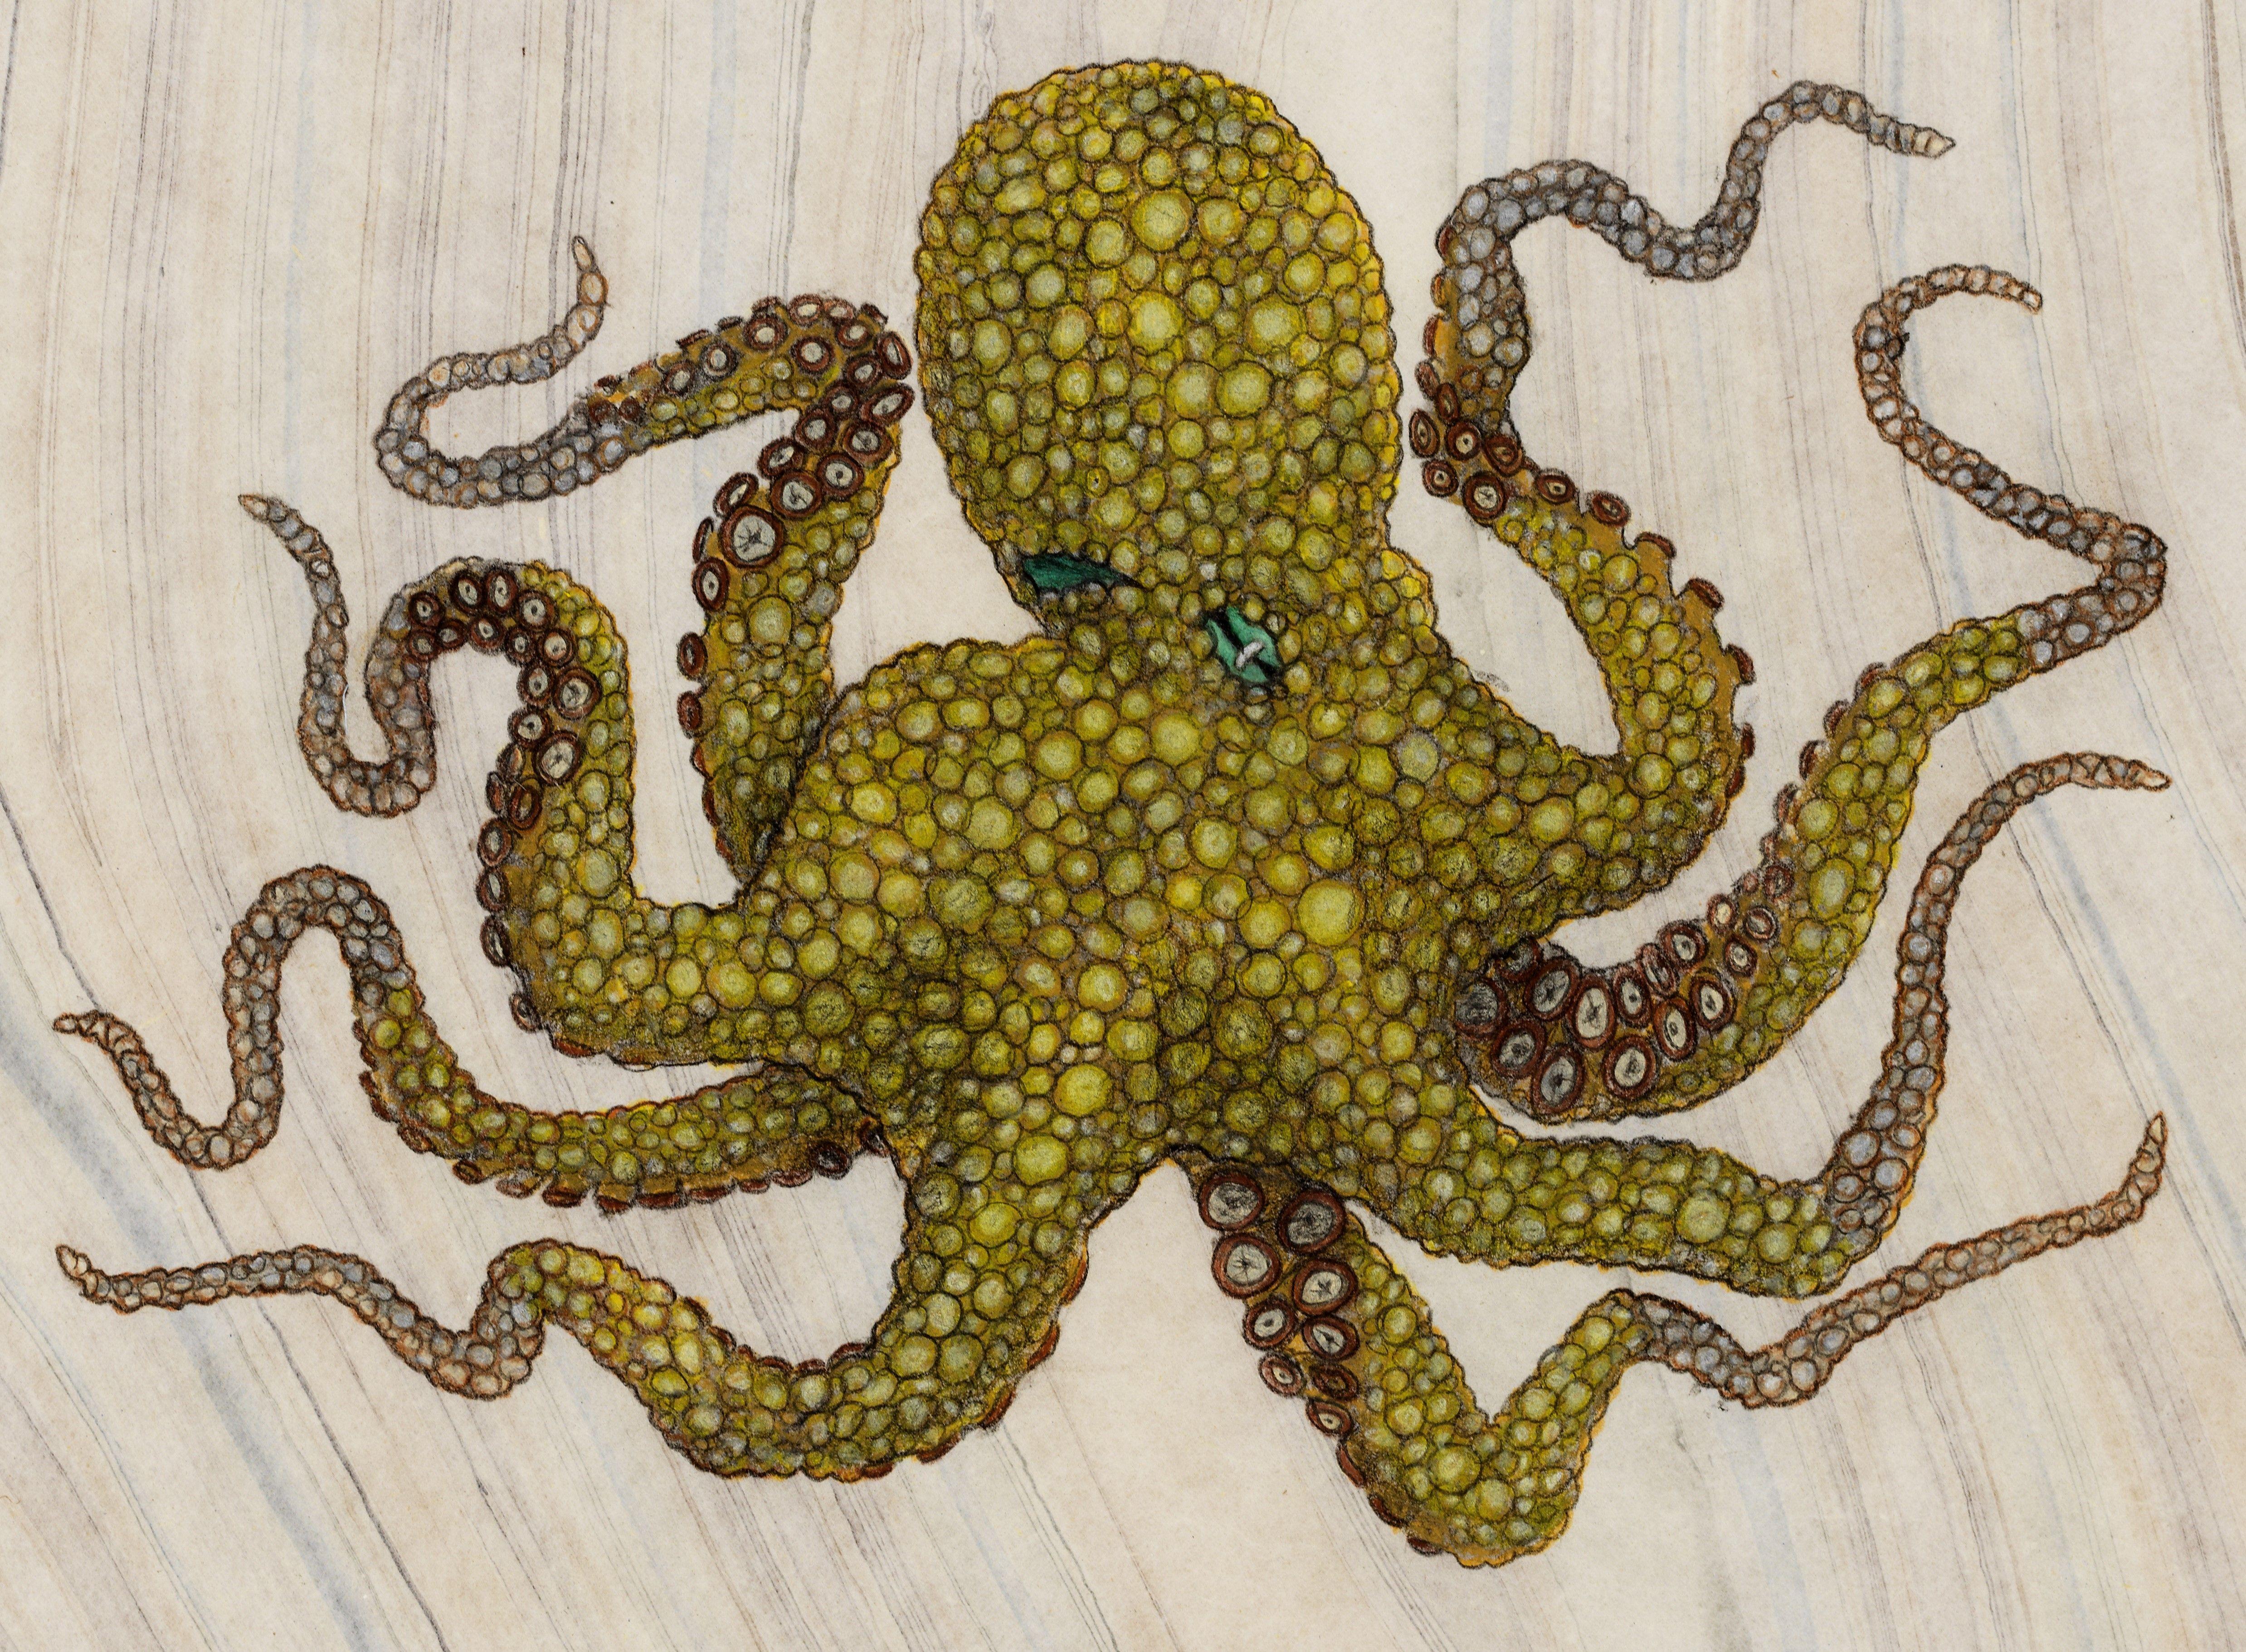 colour of octopus